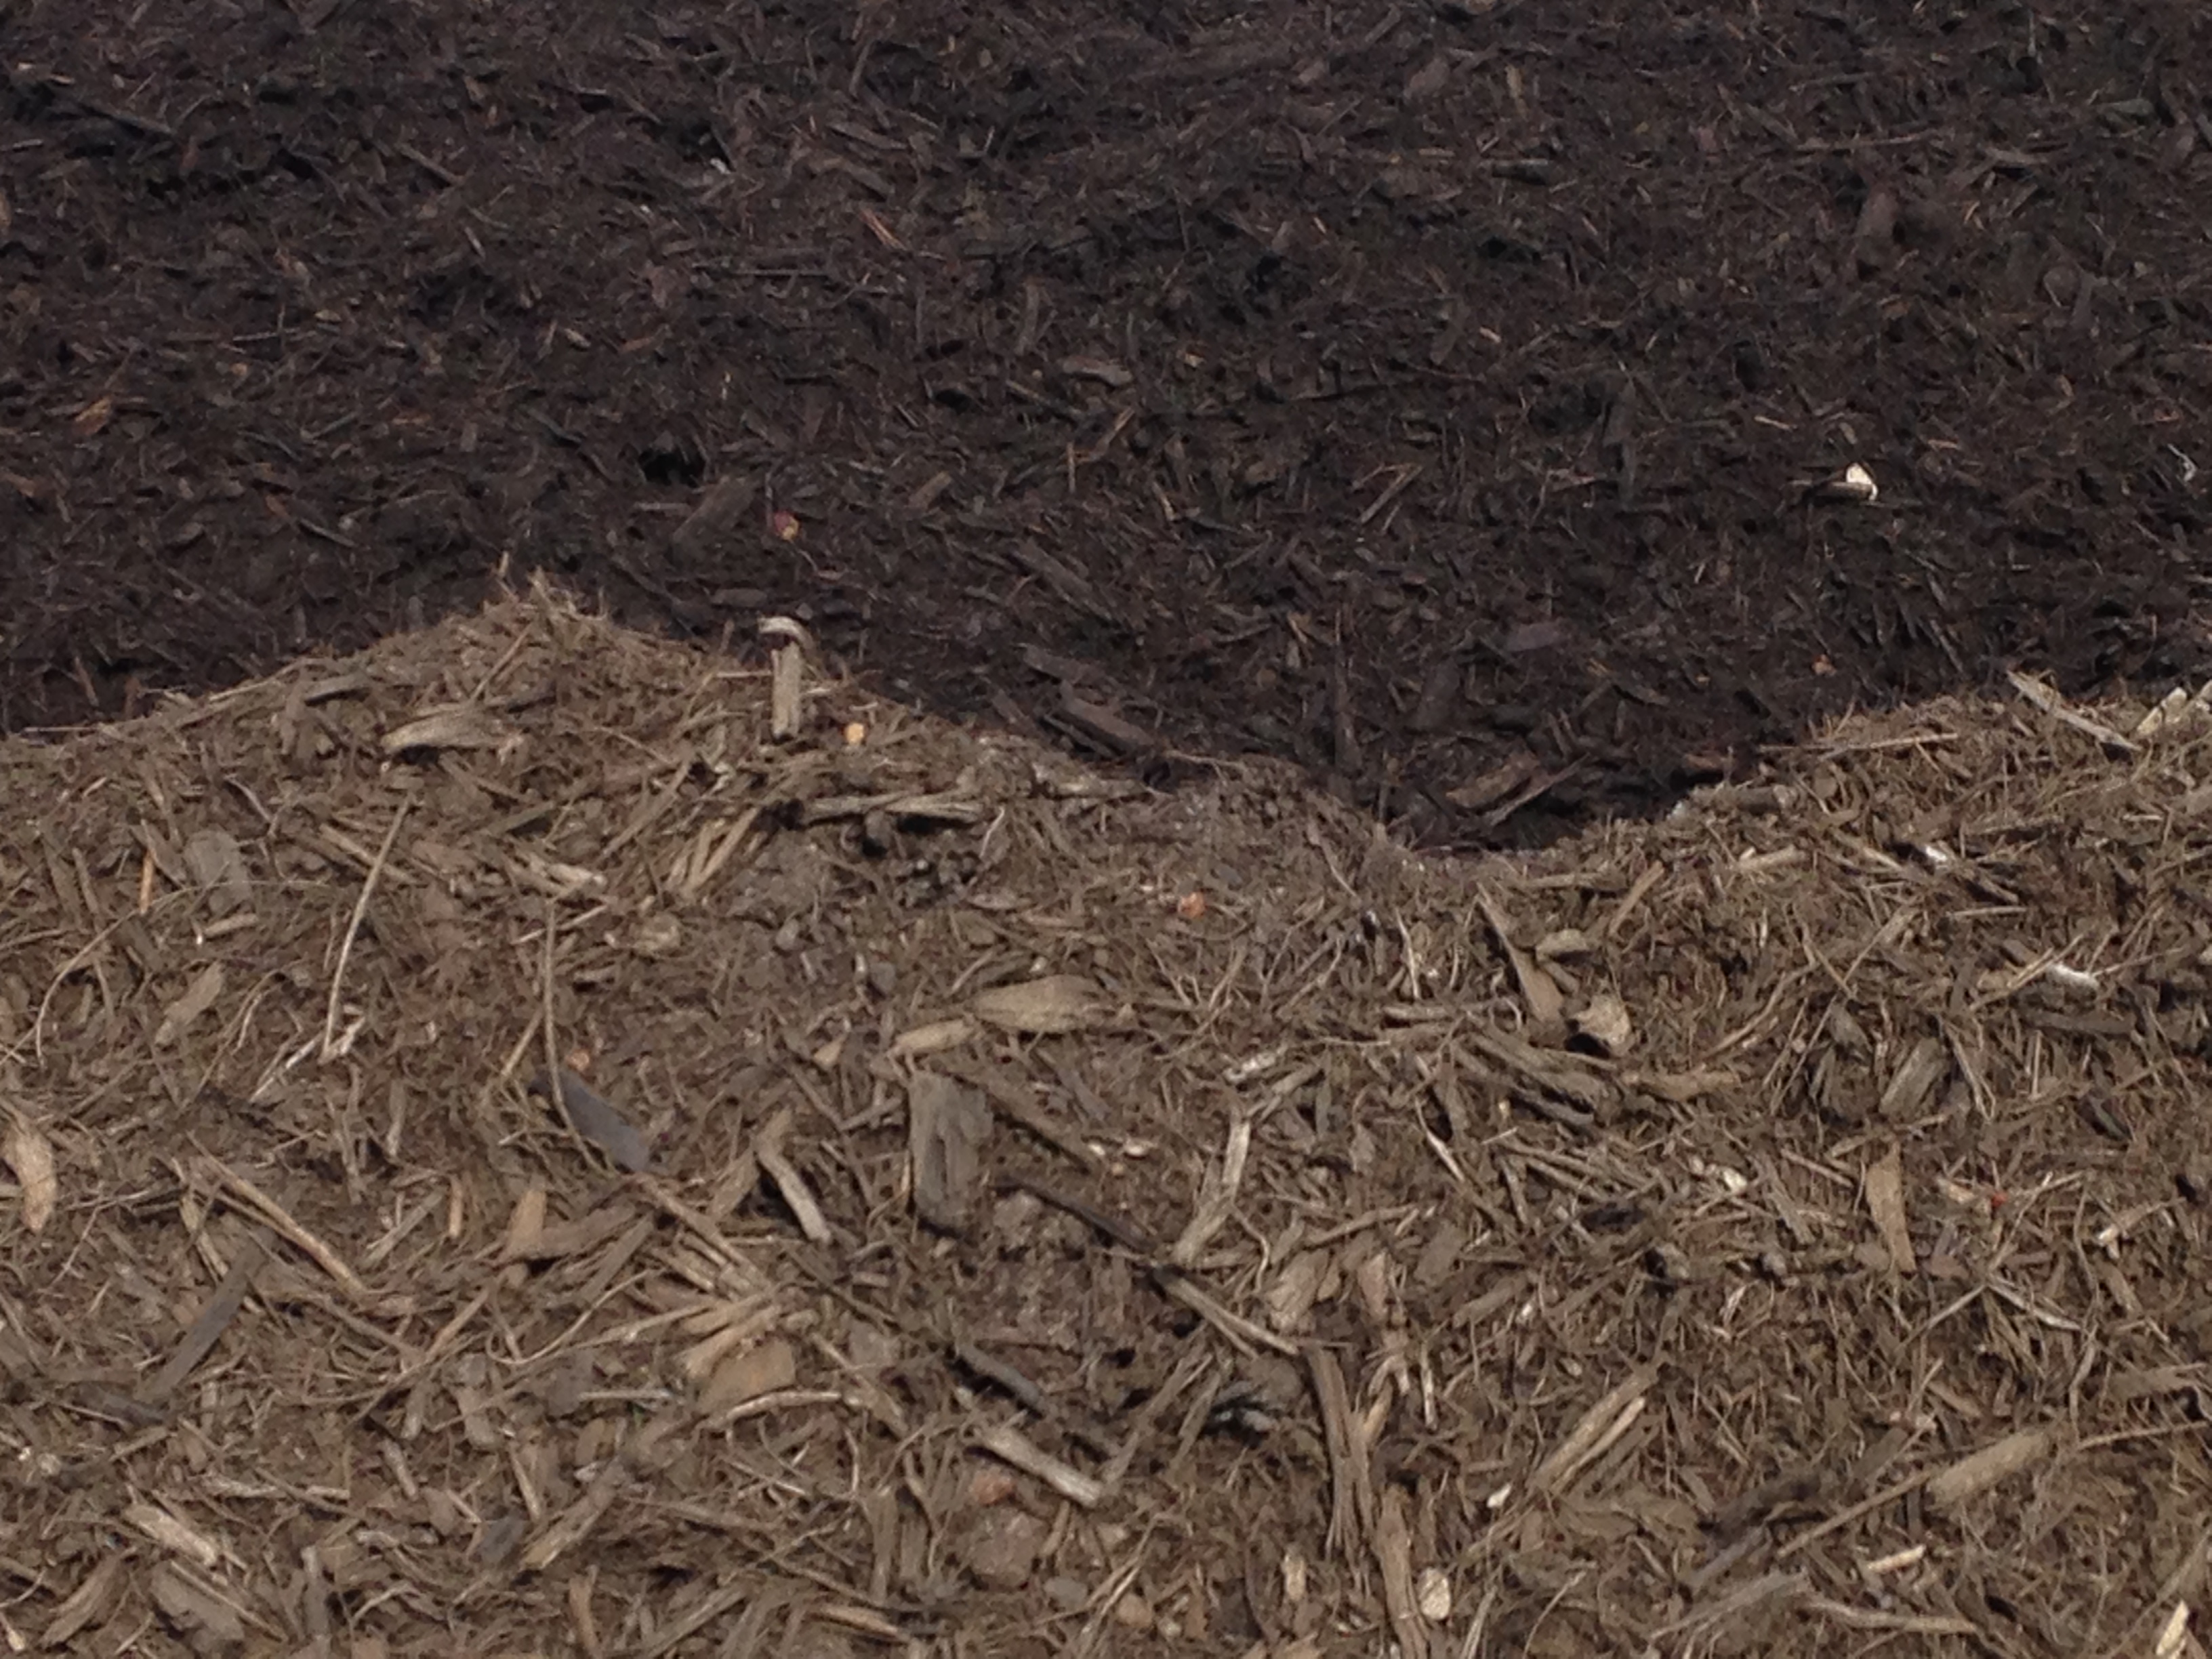 Mulch in brown and dark brown